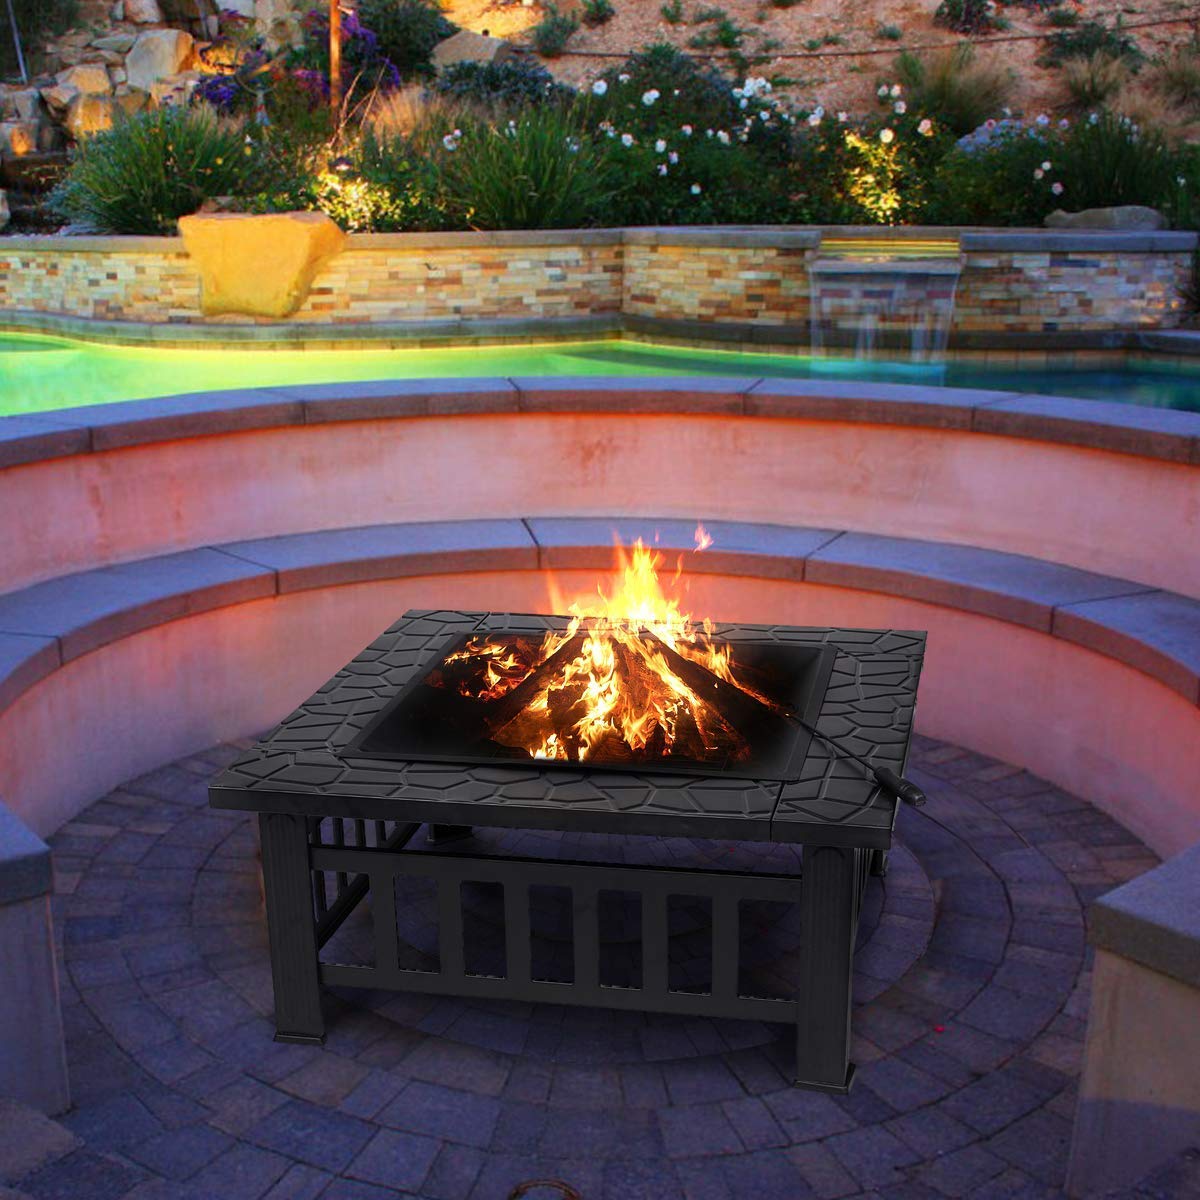 KingSo 32'' Outdoor Fire Pit Metal Square Firepit Patio Stove Wood ...
